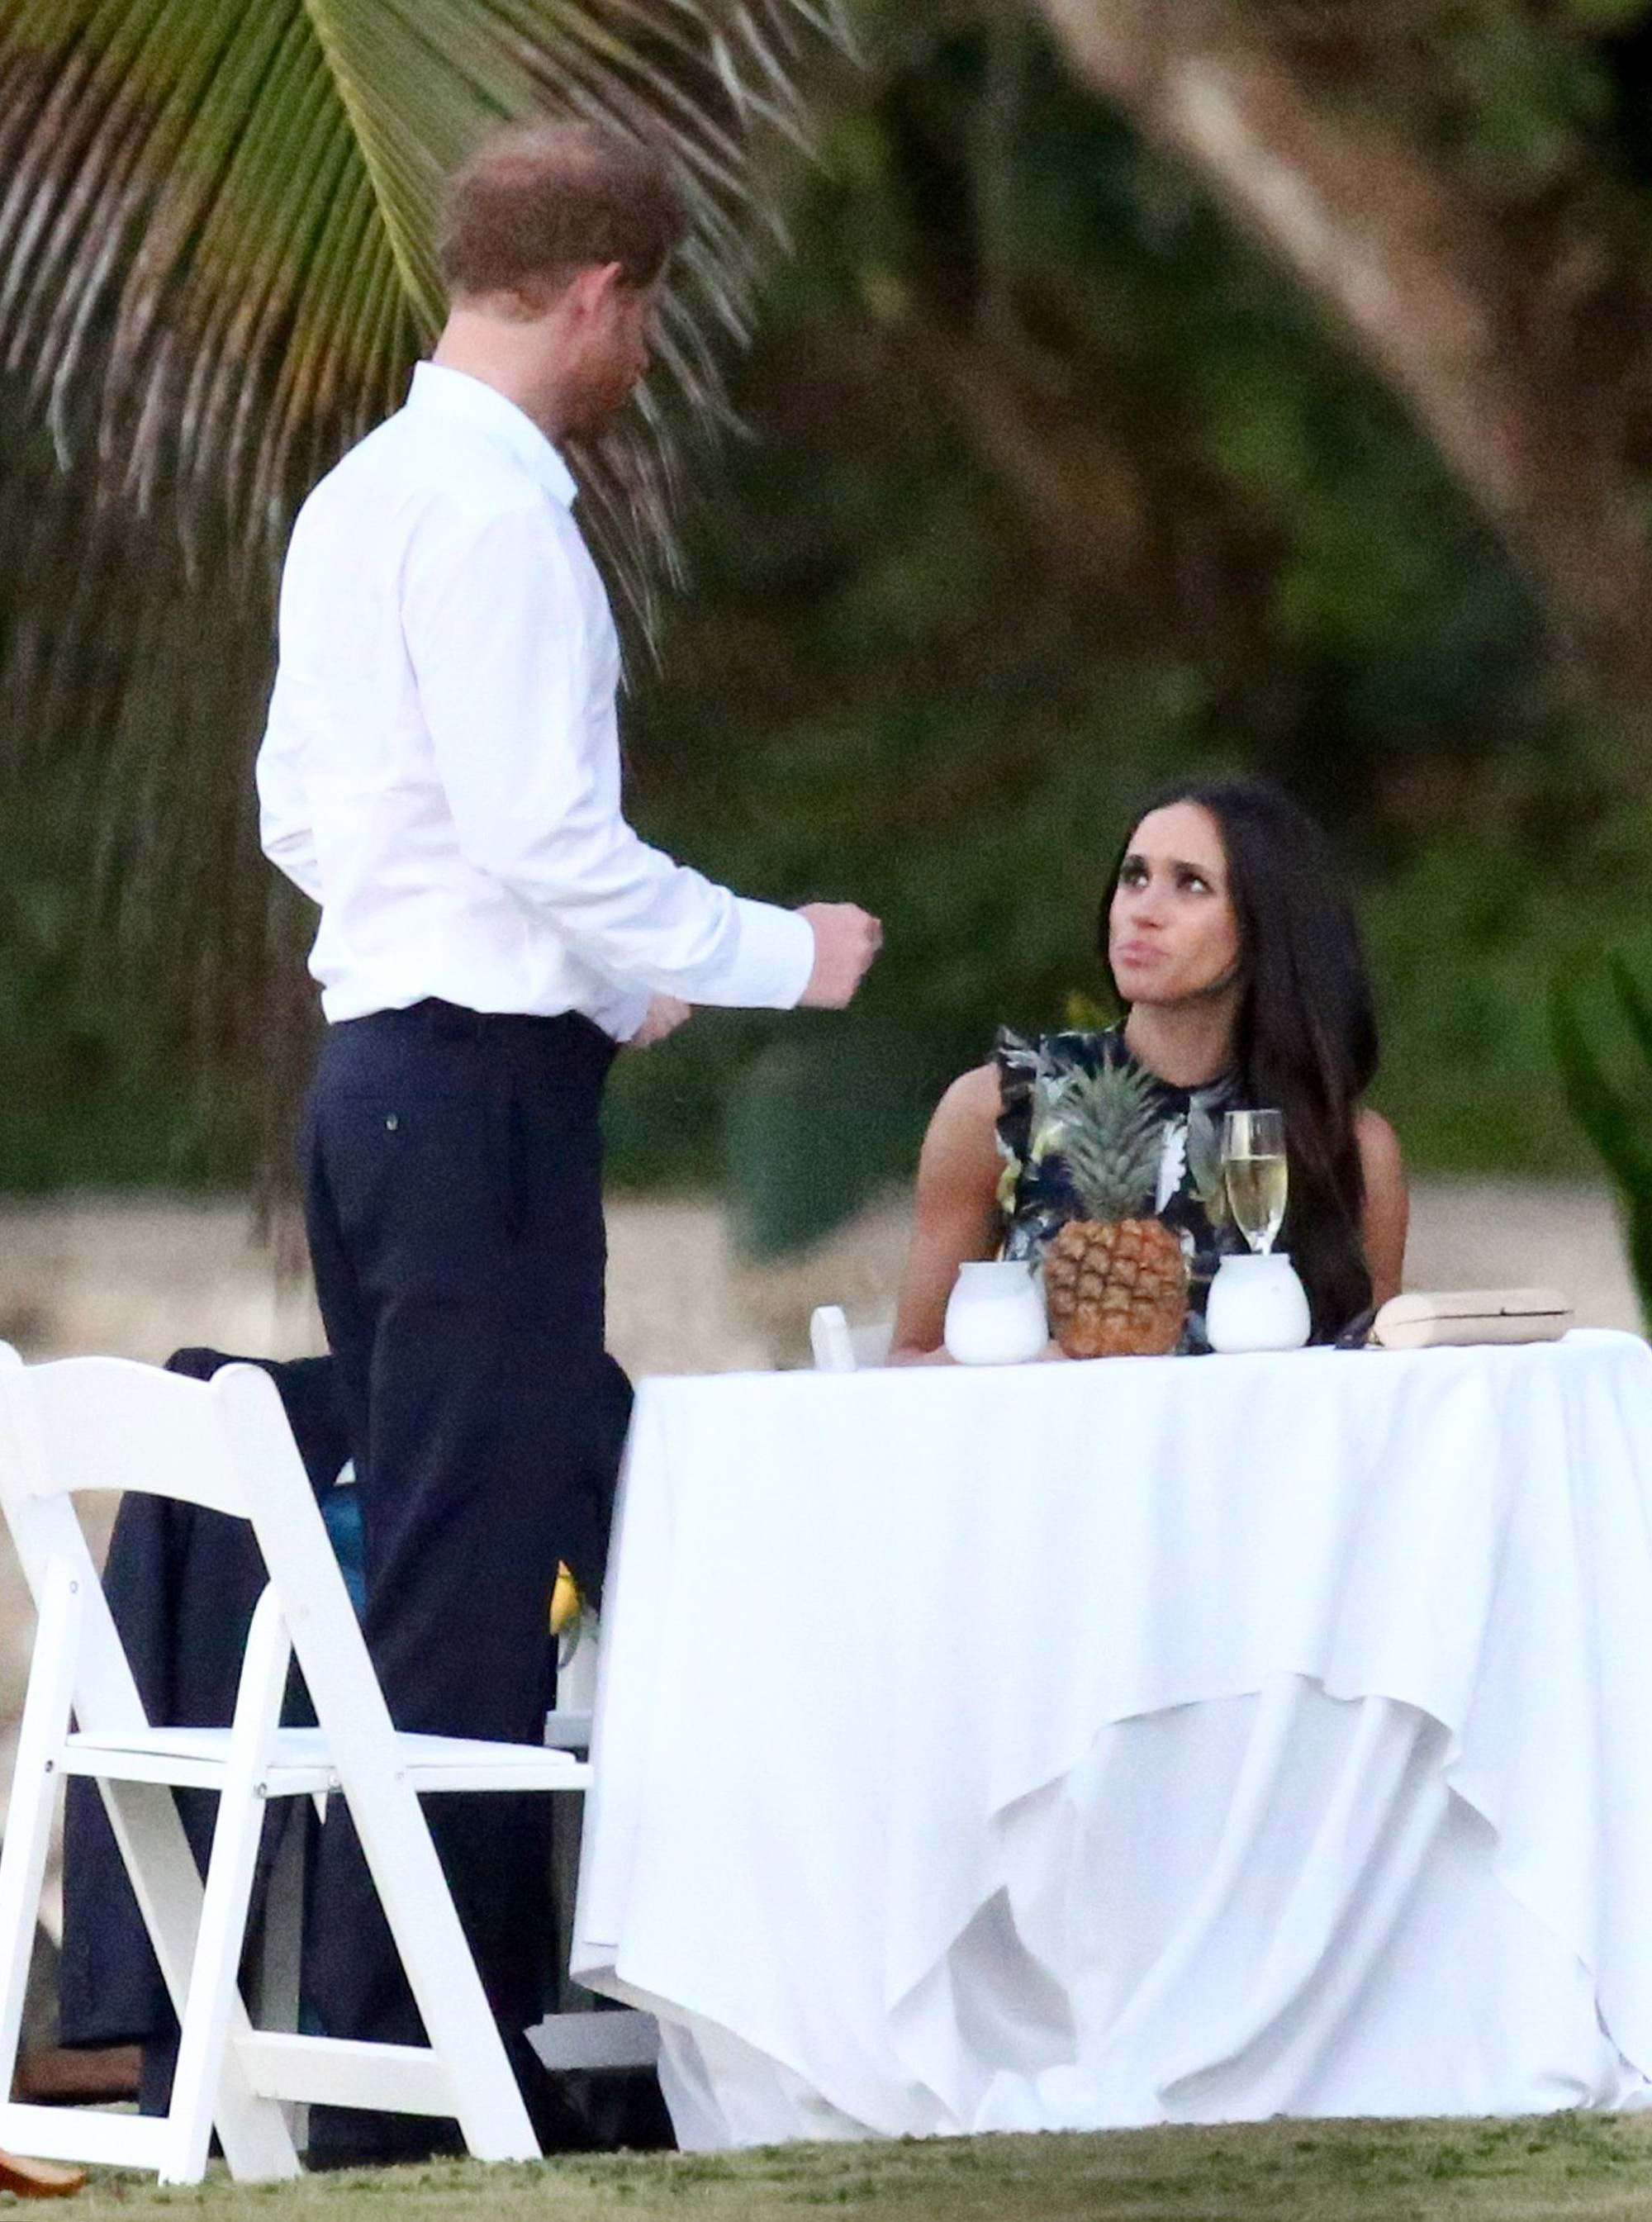 The moment Meghan dropped her mask with a scary expression in the middle of a friend's wedding made Harry helplessly bow his head - Photo 6.